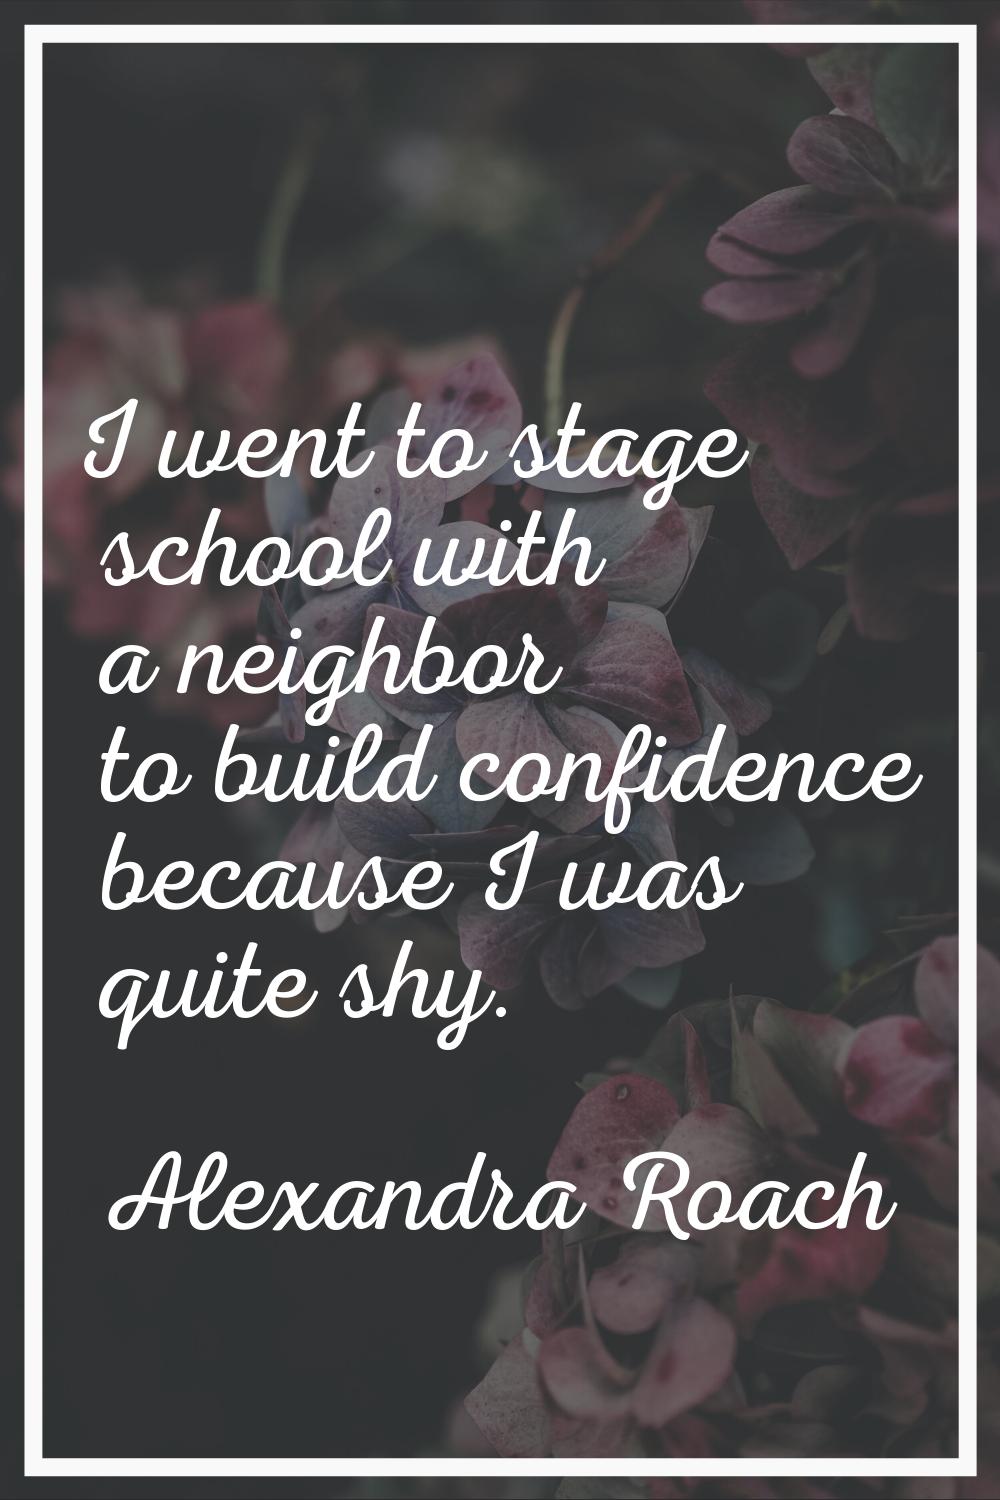 I went to stage school with a neighbor to build confidence because I was quite shy.